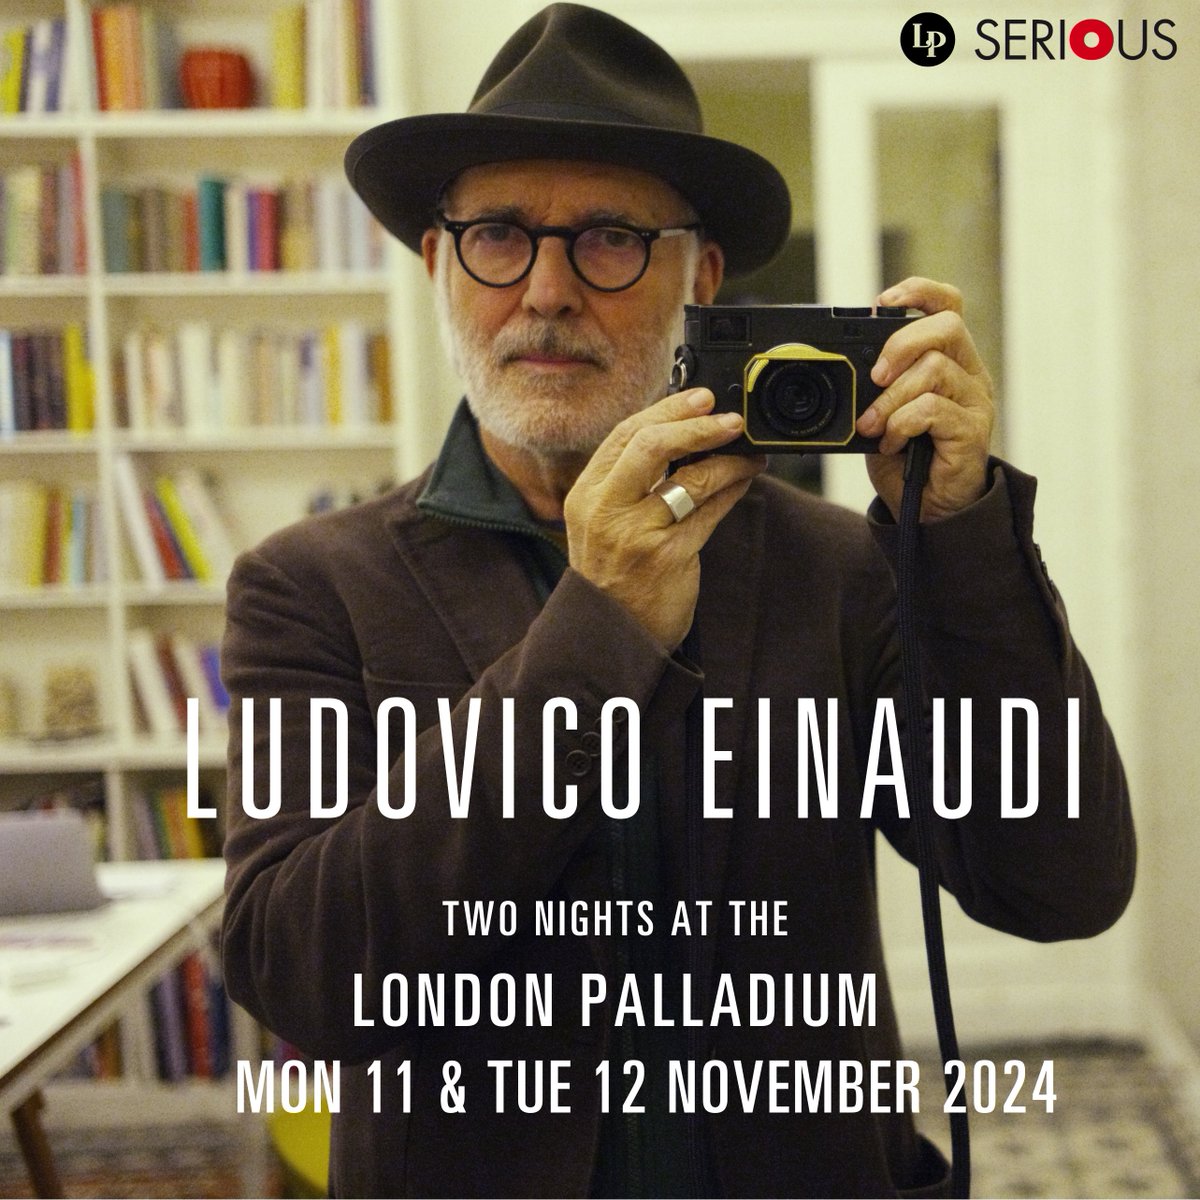 🔔 Just announced @LudovicoEinaud performs 2 nights at the legendary @LondonPalladium this November as his only UK concerts this year! Mon 11 November Tue 12 November ⏰Set your alarms, tickets go on sale this Thu 18 April, 10am – serious.org.uk/einaudi